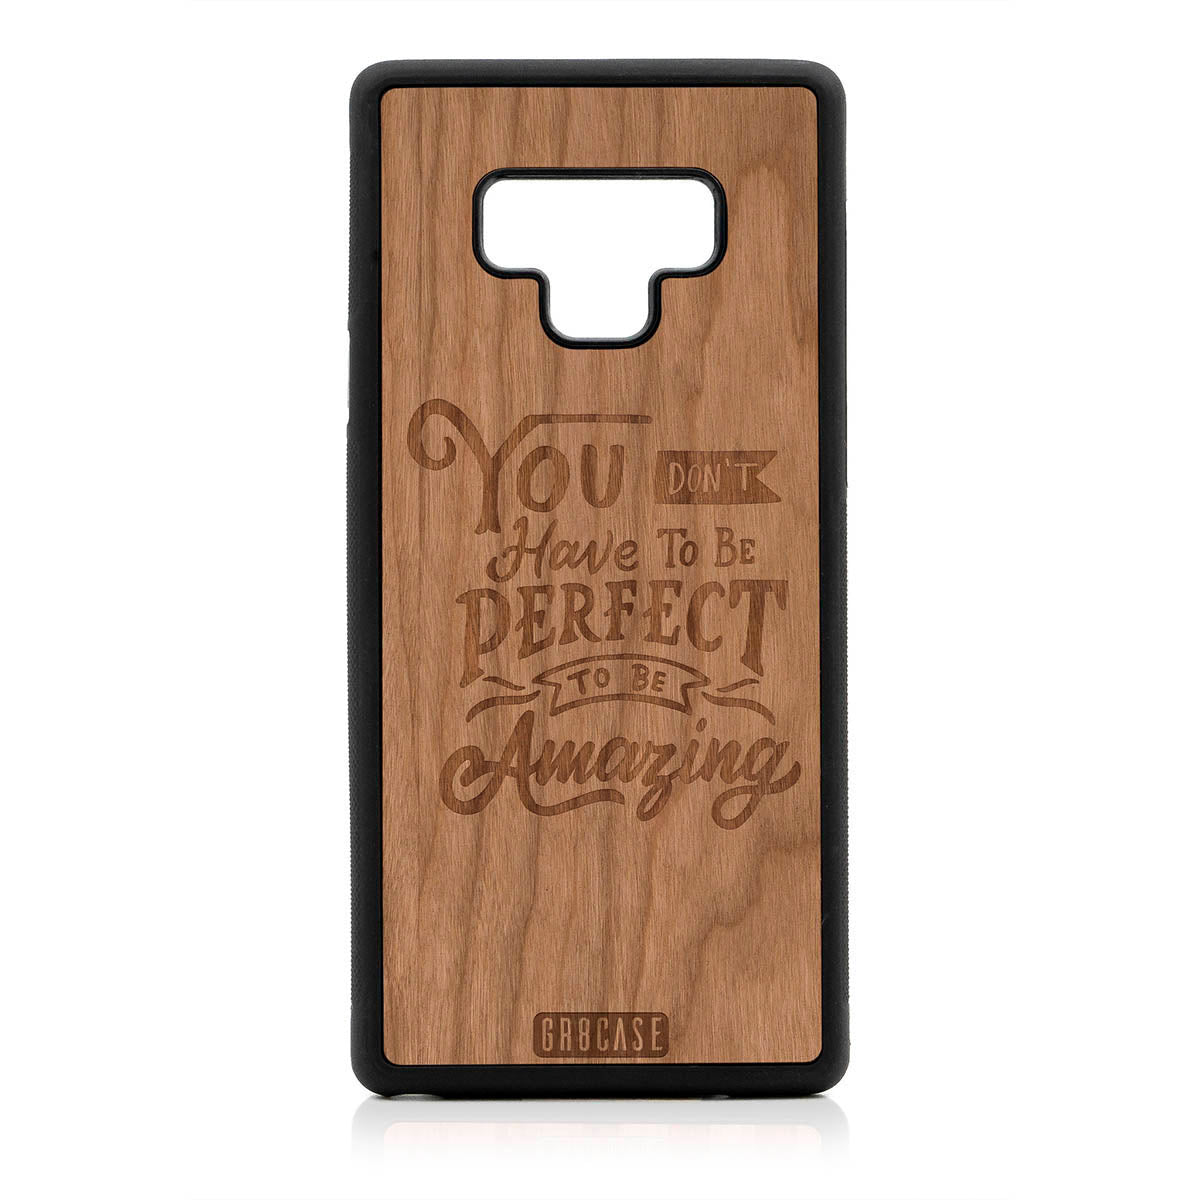 You Don't Have To Be Perfect To Be Amazing Design Wood Case For Samsung Galaxy Note 9